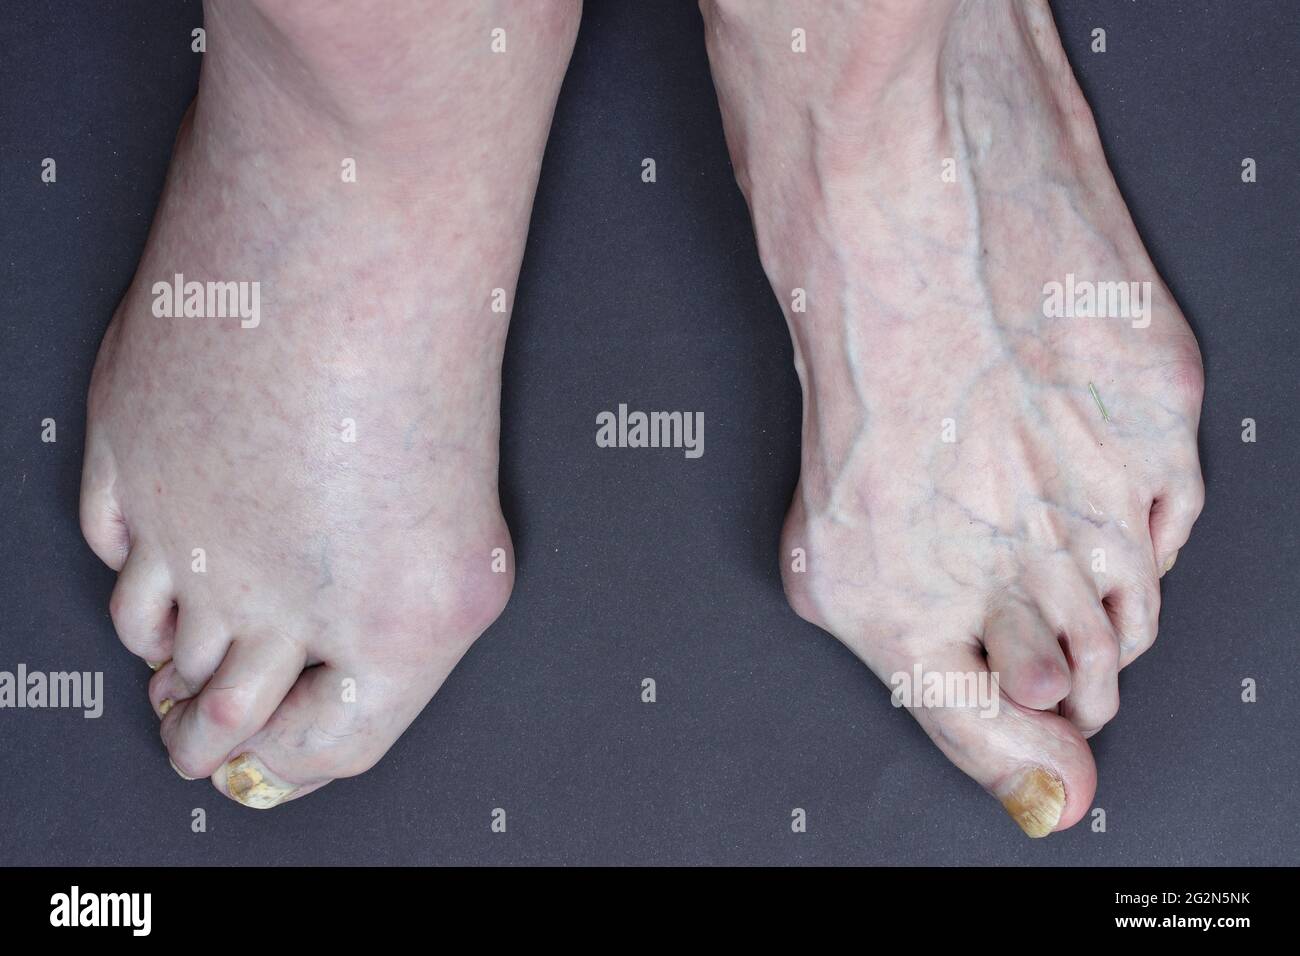 Three problems in a 74-year-old man: deformity of human foot - hallux valgus, diagnosed thrombosis on right leg and fungal nail infections Stock Photo